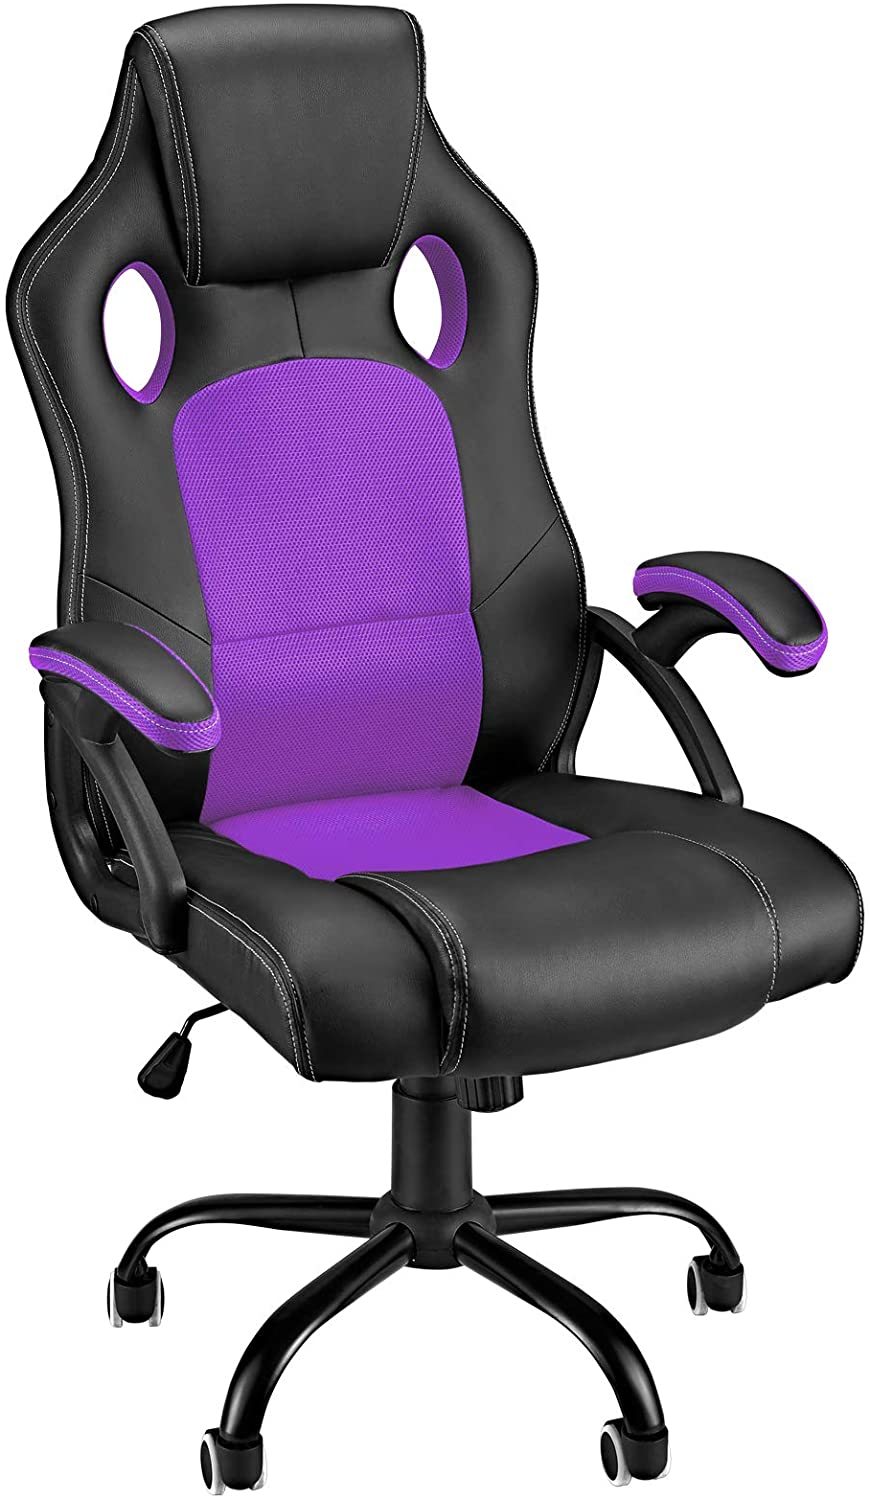 Executive Computer Chair Racing Gaming Chair Ergonomic Office Chairs